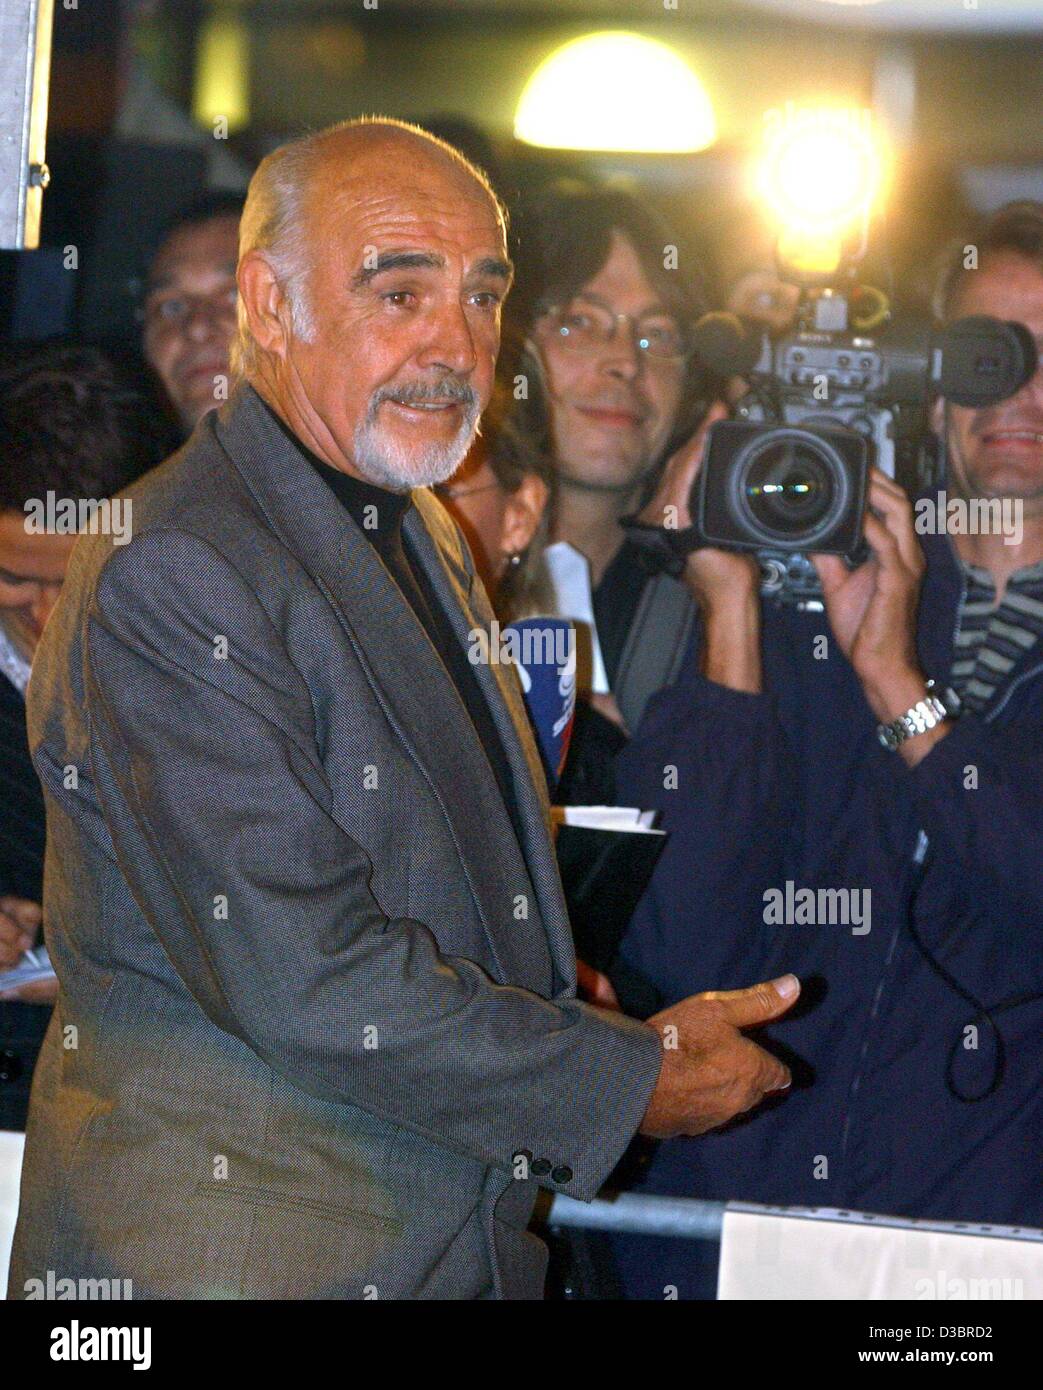 (dpa) - The Scottisch actor Sir Sean Connery ('James Bond', 'Name of the rose', 'The Rock', 'Finding Forrester') arrives at the premiere of his new film 'The Legue of Extraordinary Gentlemen' in Berlin, Germany, 30 September 2003. Numerous VIPs showed up at the event in the cinema 'Cosmos'. Sean Con Stock Photo